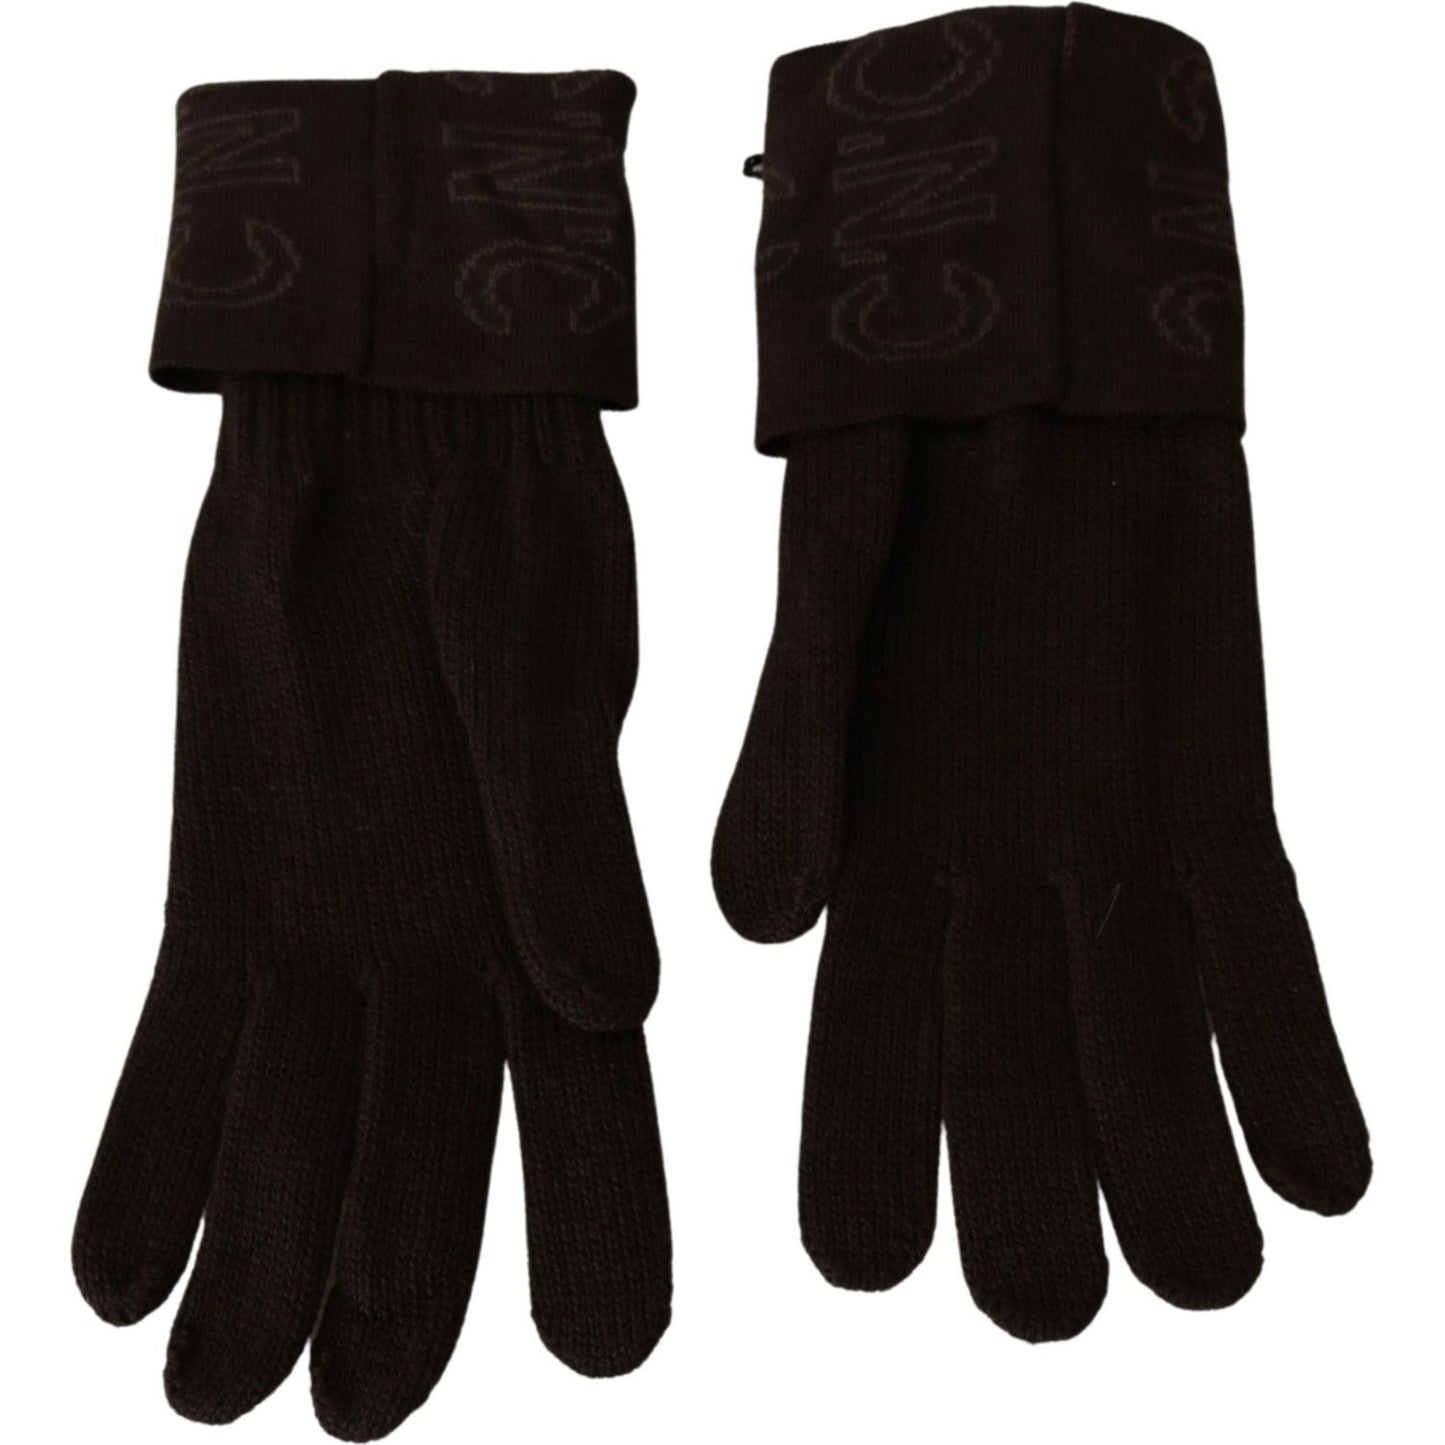 Costume National Elegant Brown Knitted Gloves brown-wool-knitted-one-size-wrist-length-gloves